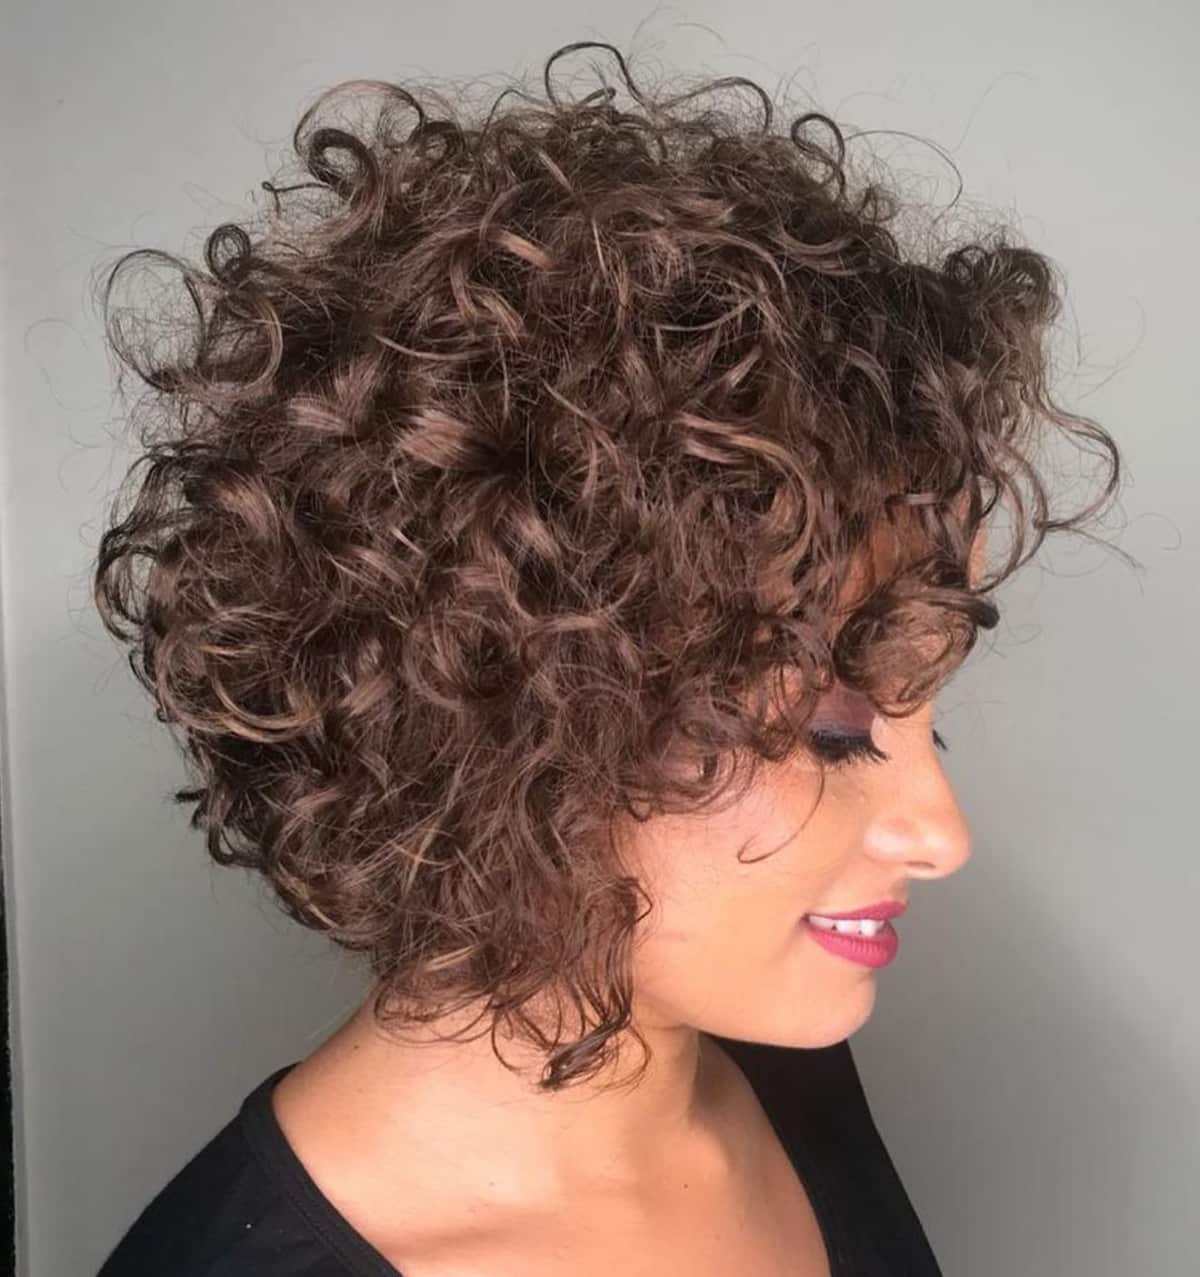 29 MostFlattering Hairstyles for Short Curly Hair to Perfectly Shape